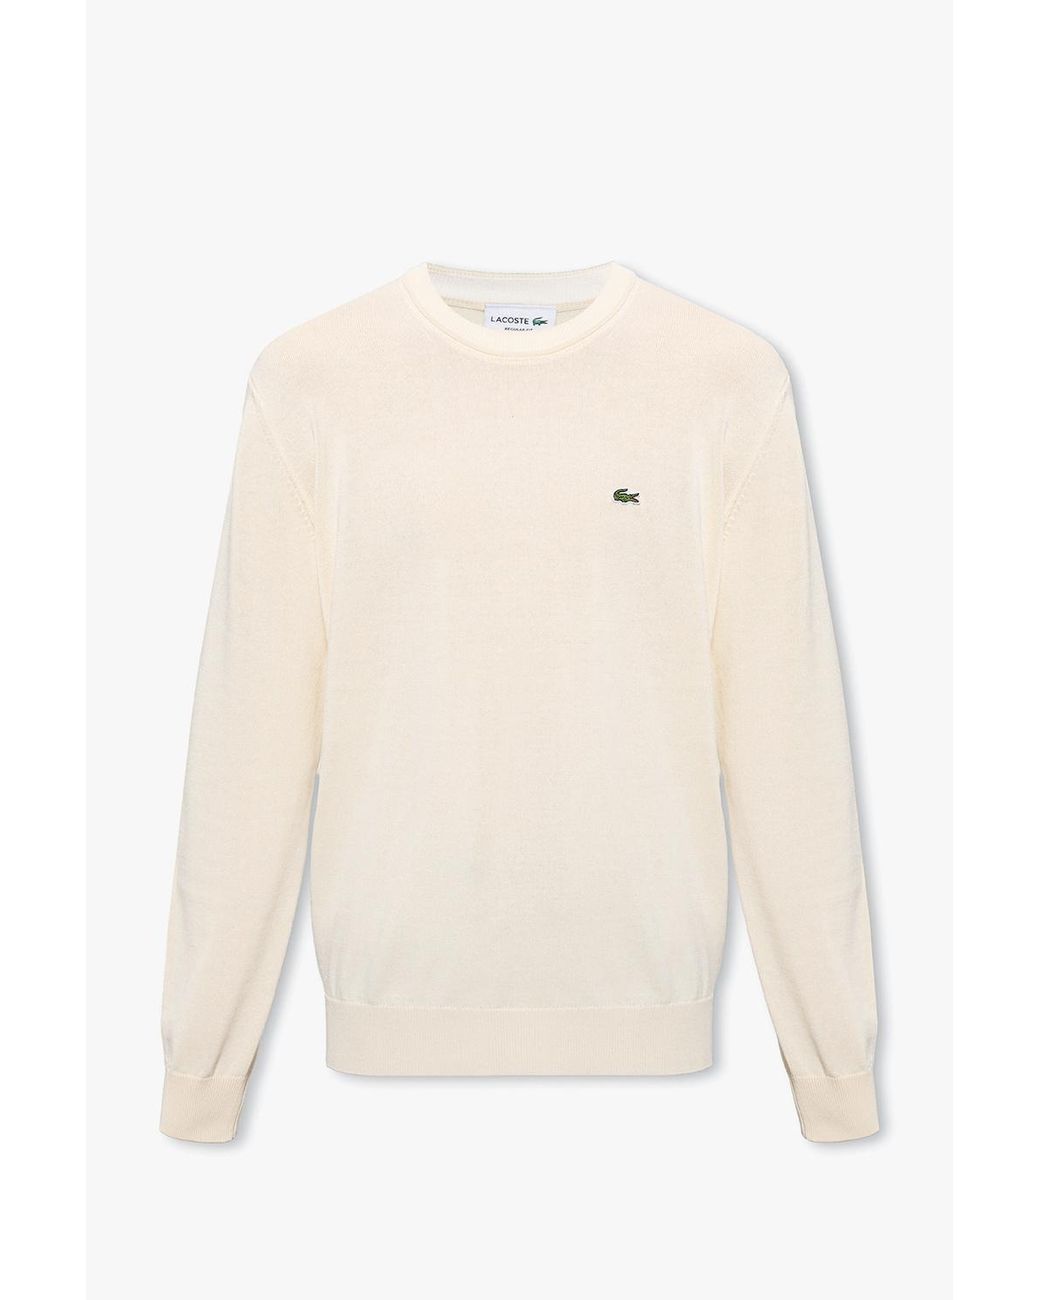 Lacoste Sweater With Logo in White for Men | Lyst Australia